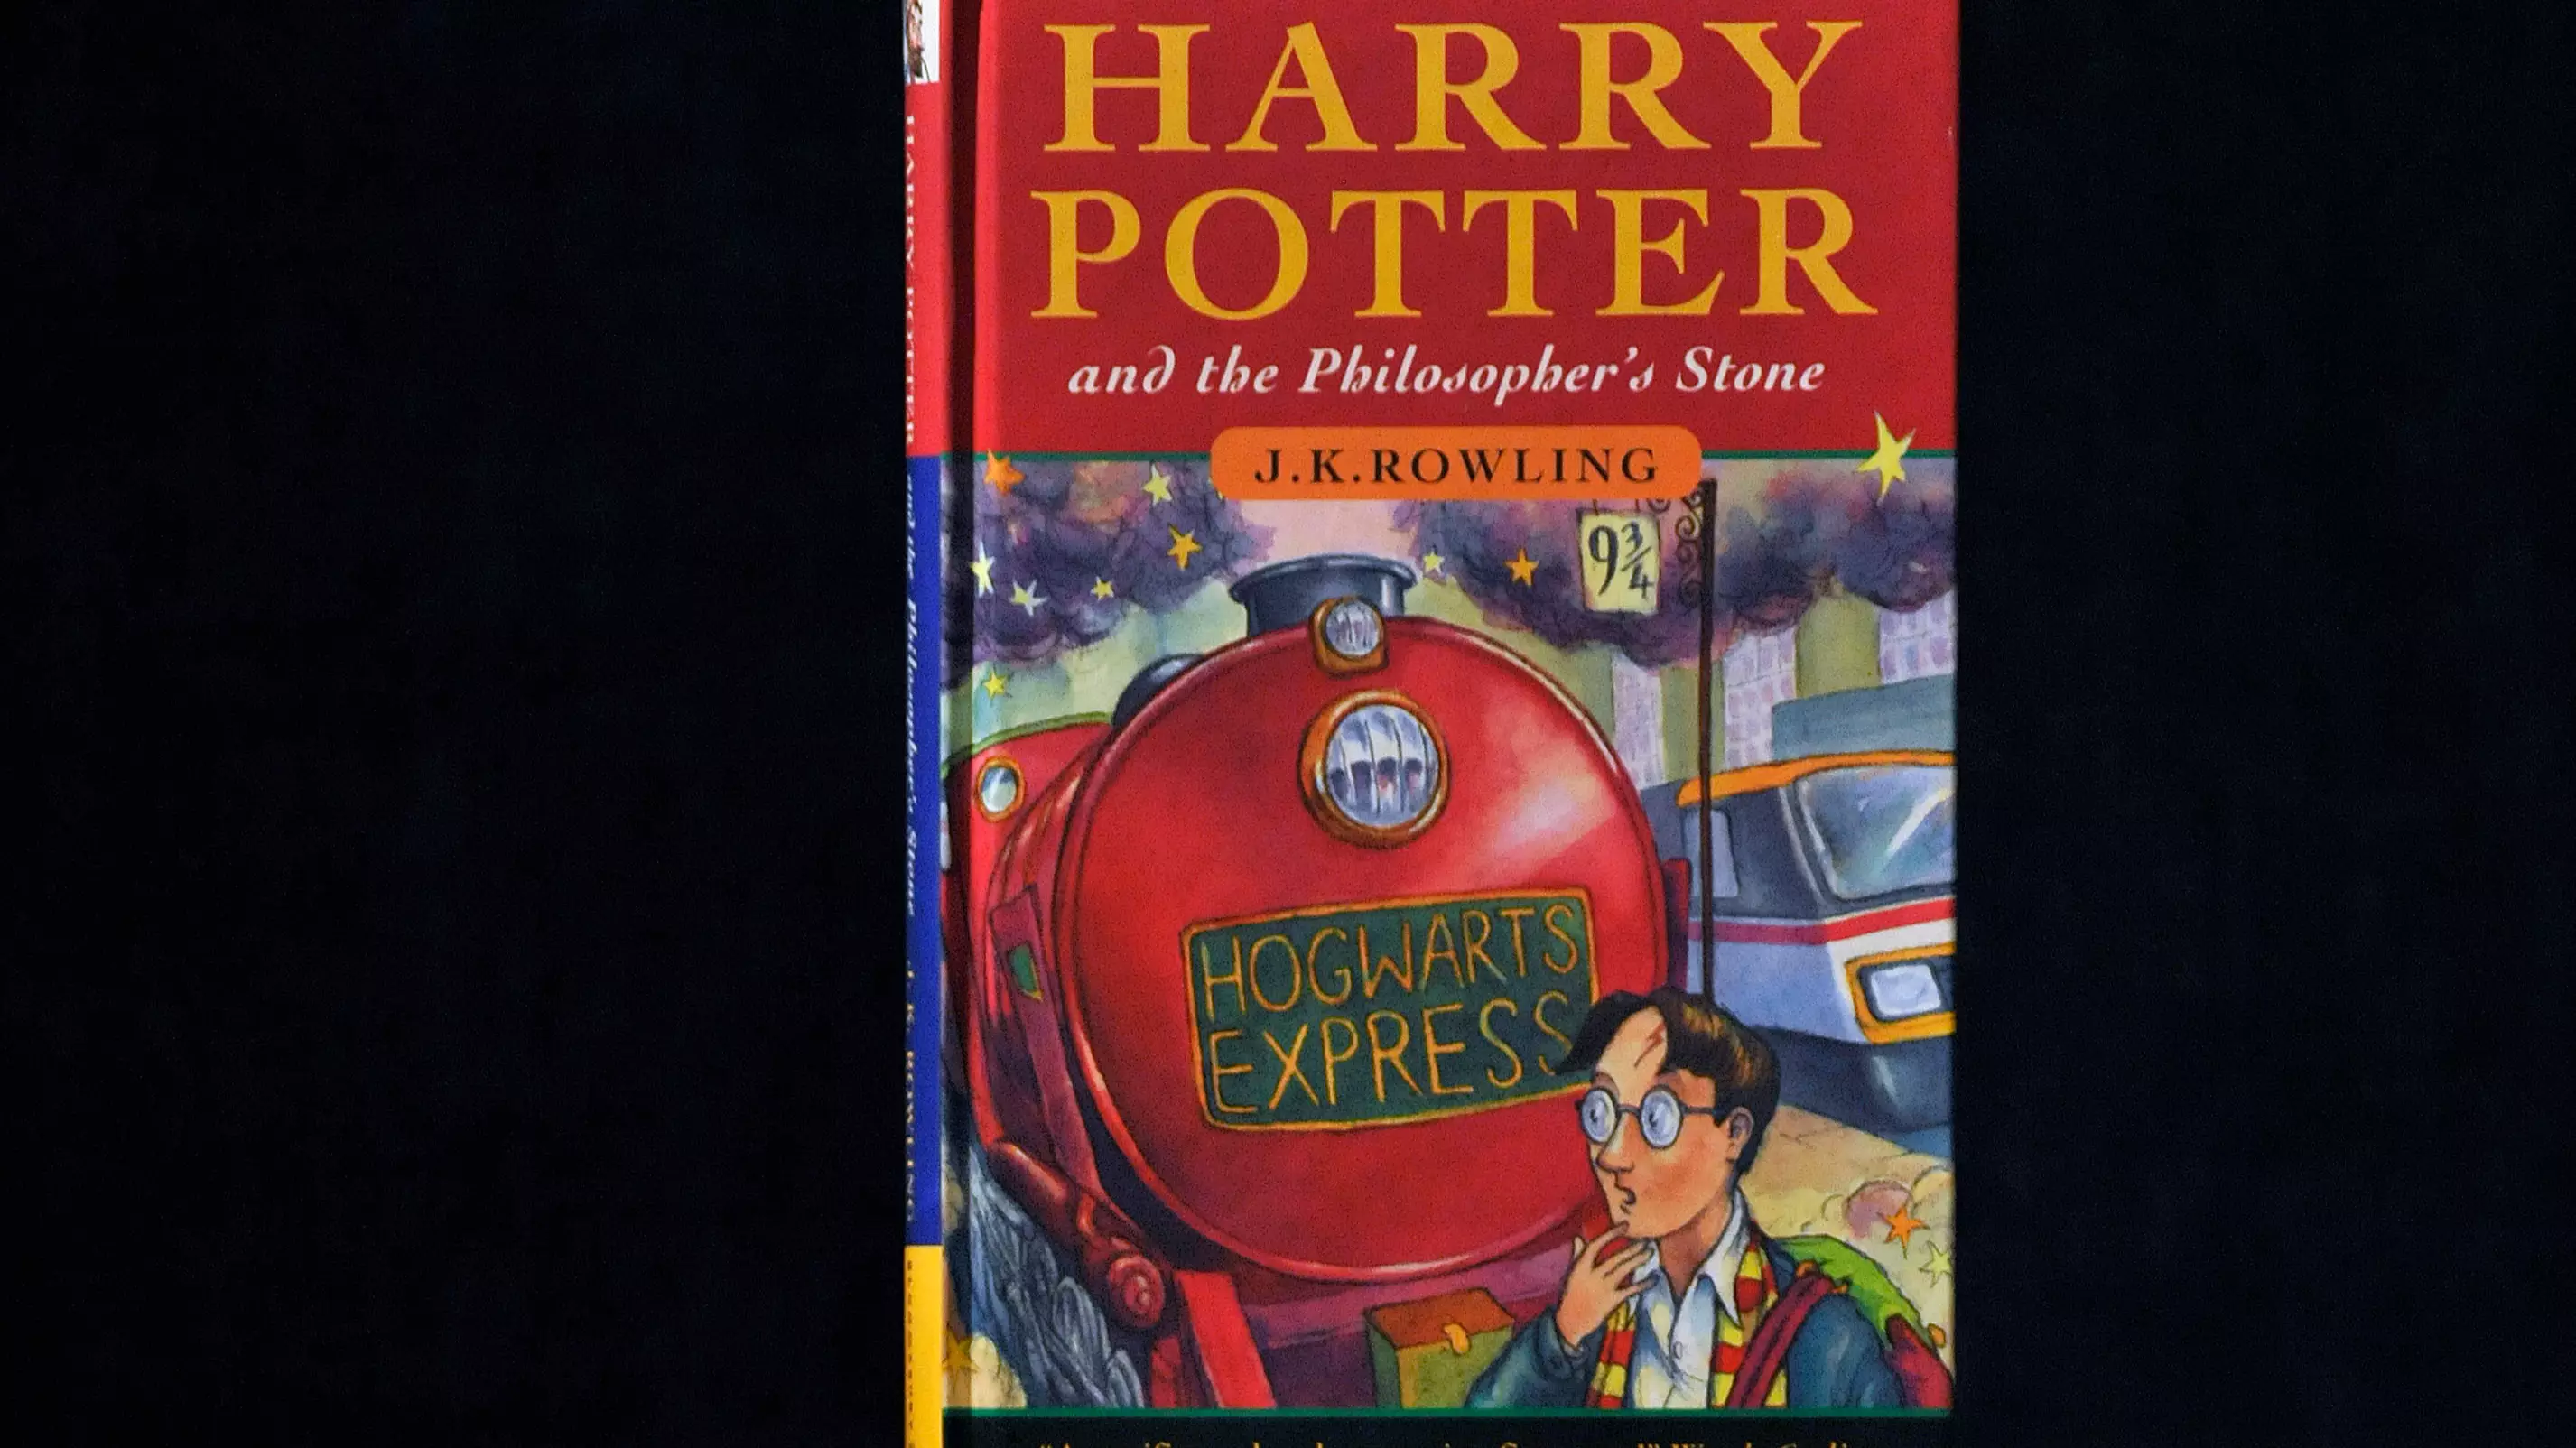 Rare Harry Potter Book Expected To Sell For £30,000 